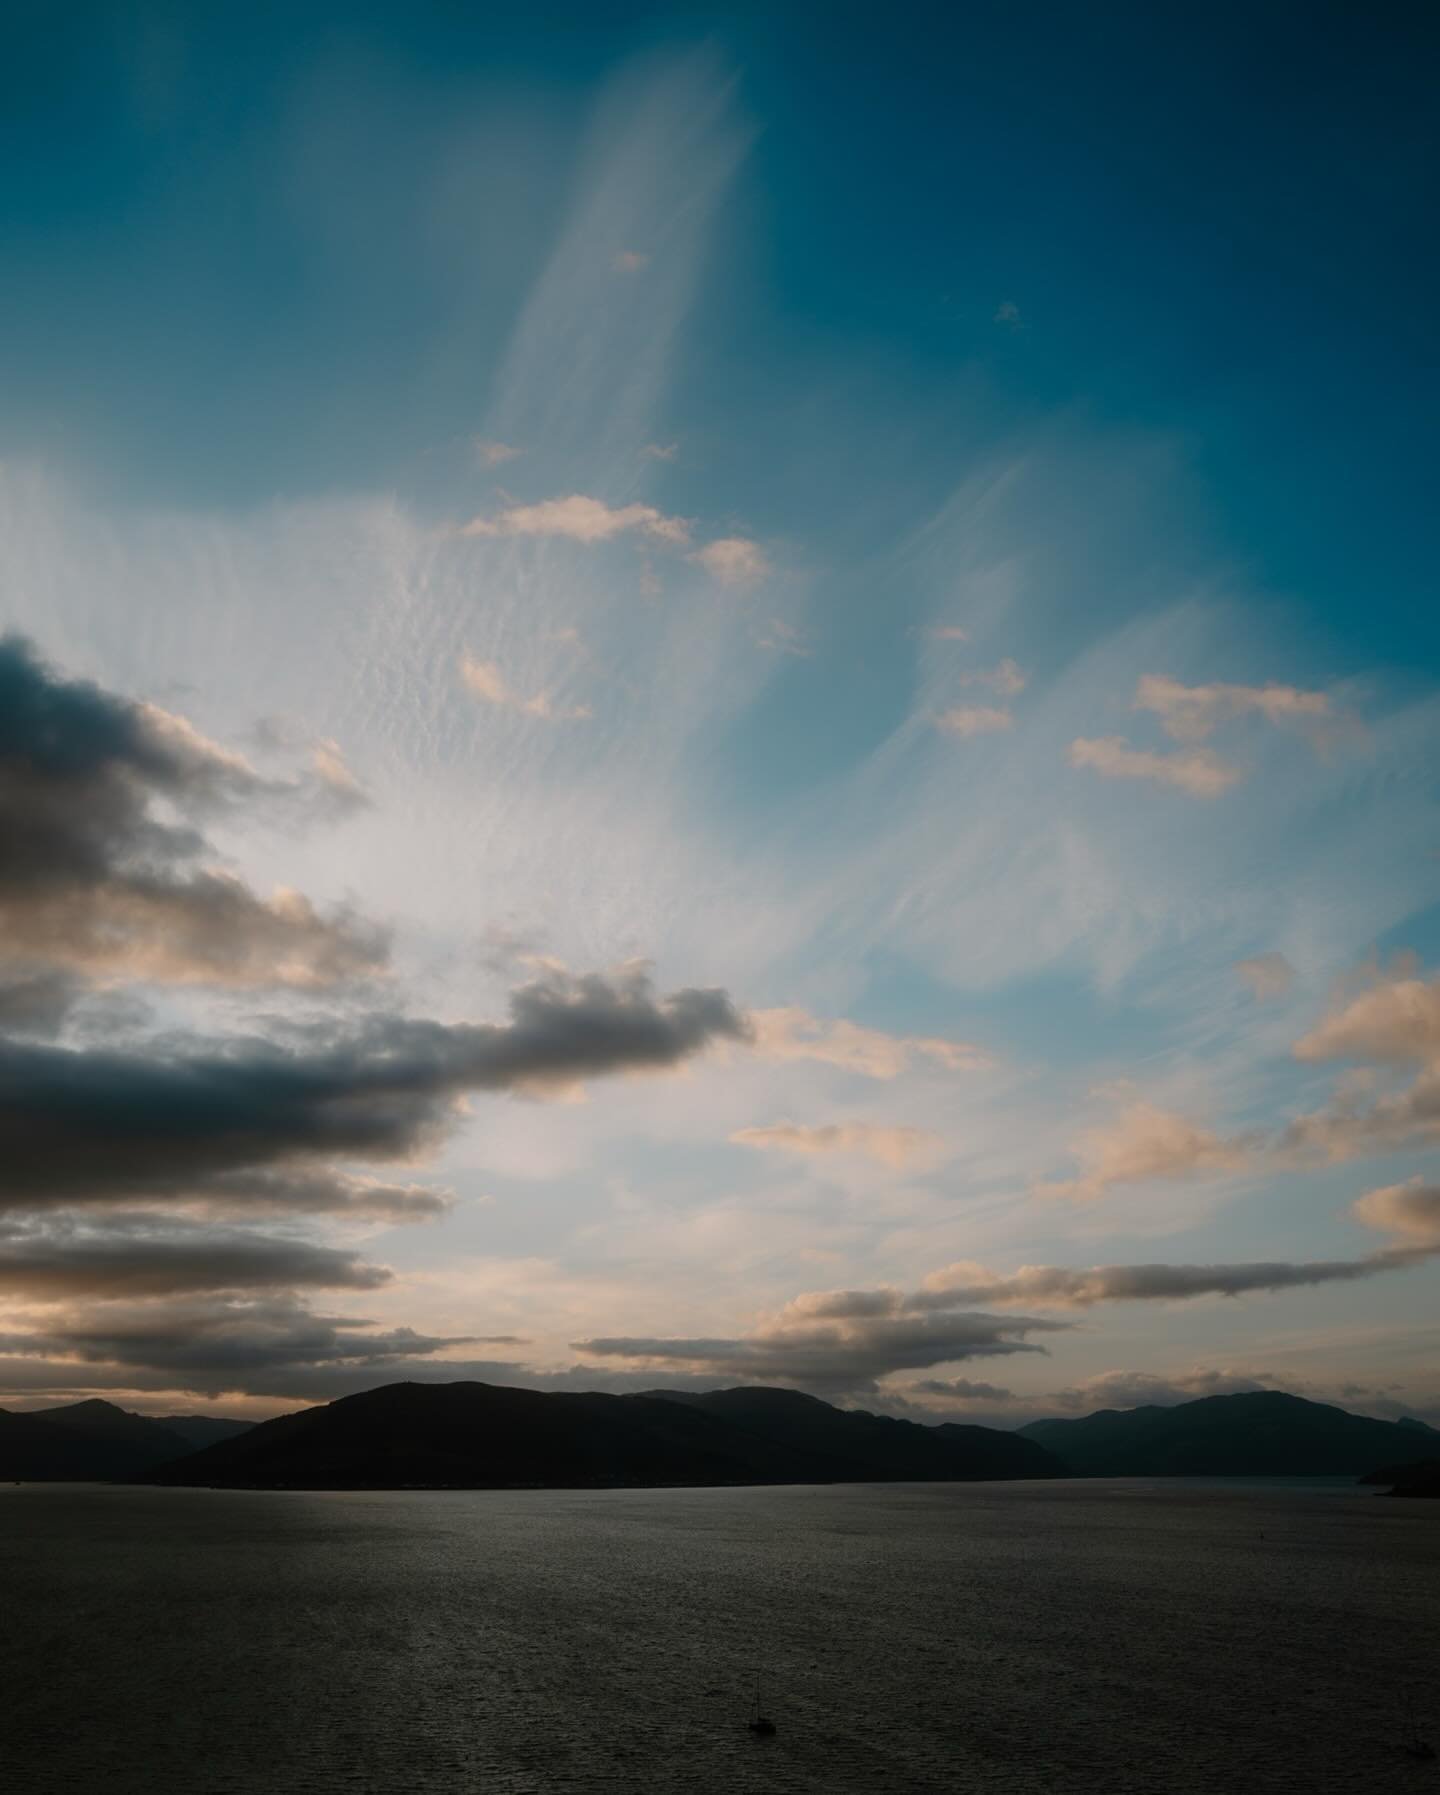 Tonight&rsquo;s Colours from the window to chill out. 

Roll on Friday to close this crazy week. 

🏴󠁧󠁢󠁳󠁣󠁴󠁿

Home ❤️

#leicaq3 #leicaq3camera #leicaq3photography #leica #simonhirdpresets #home #gourock